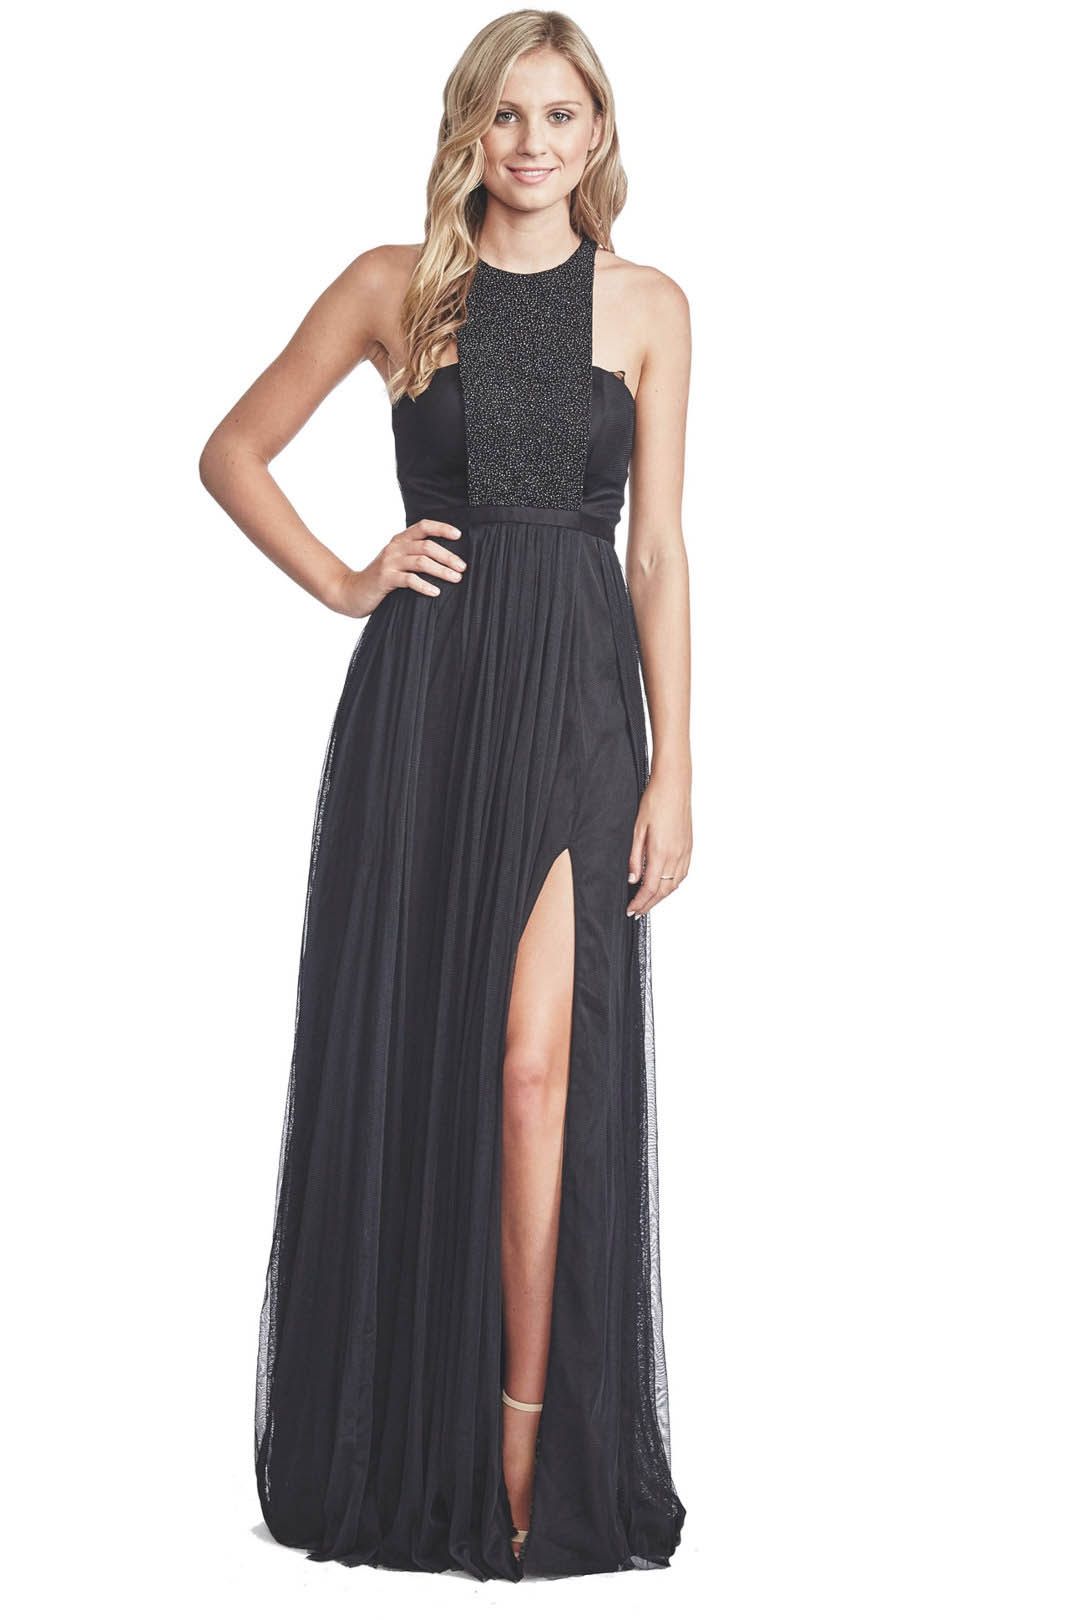 George - Morgan Gown - Black - Front